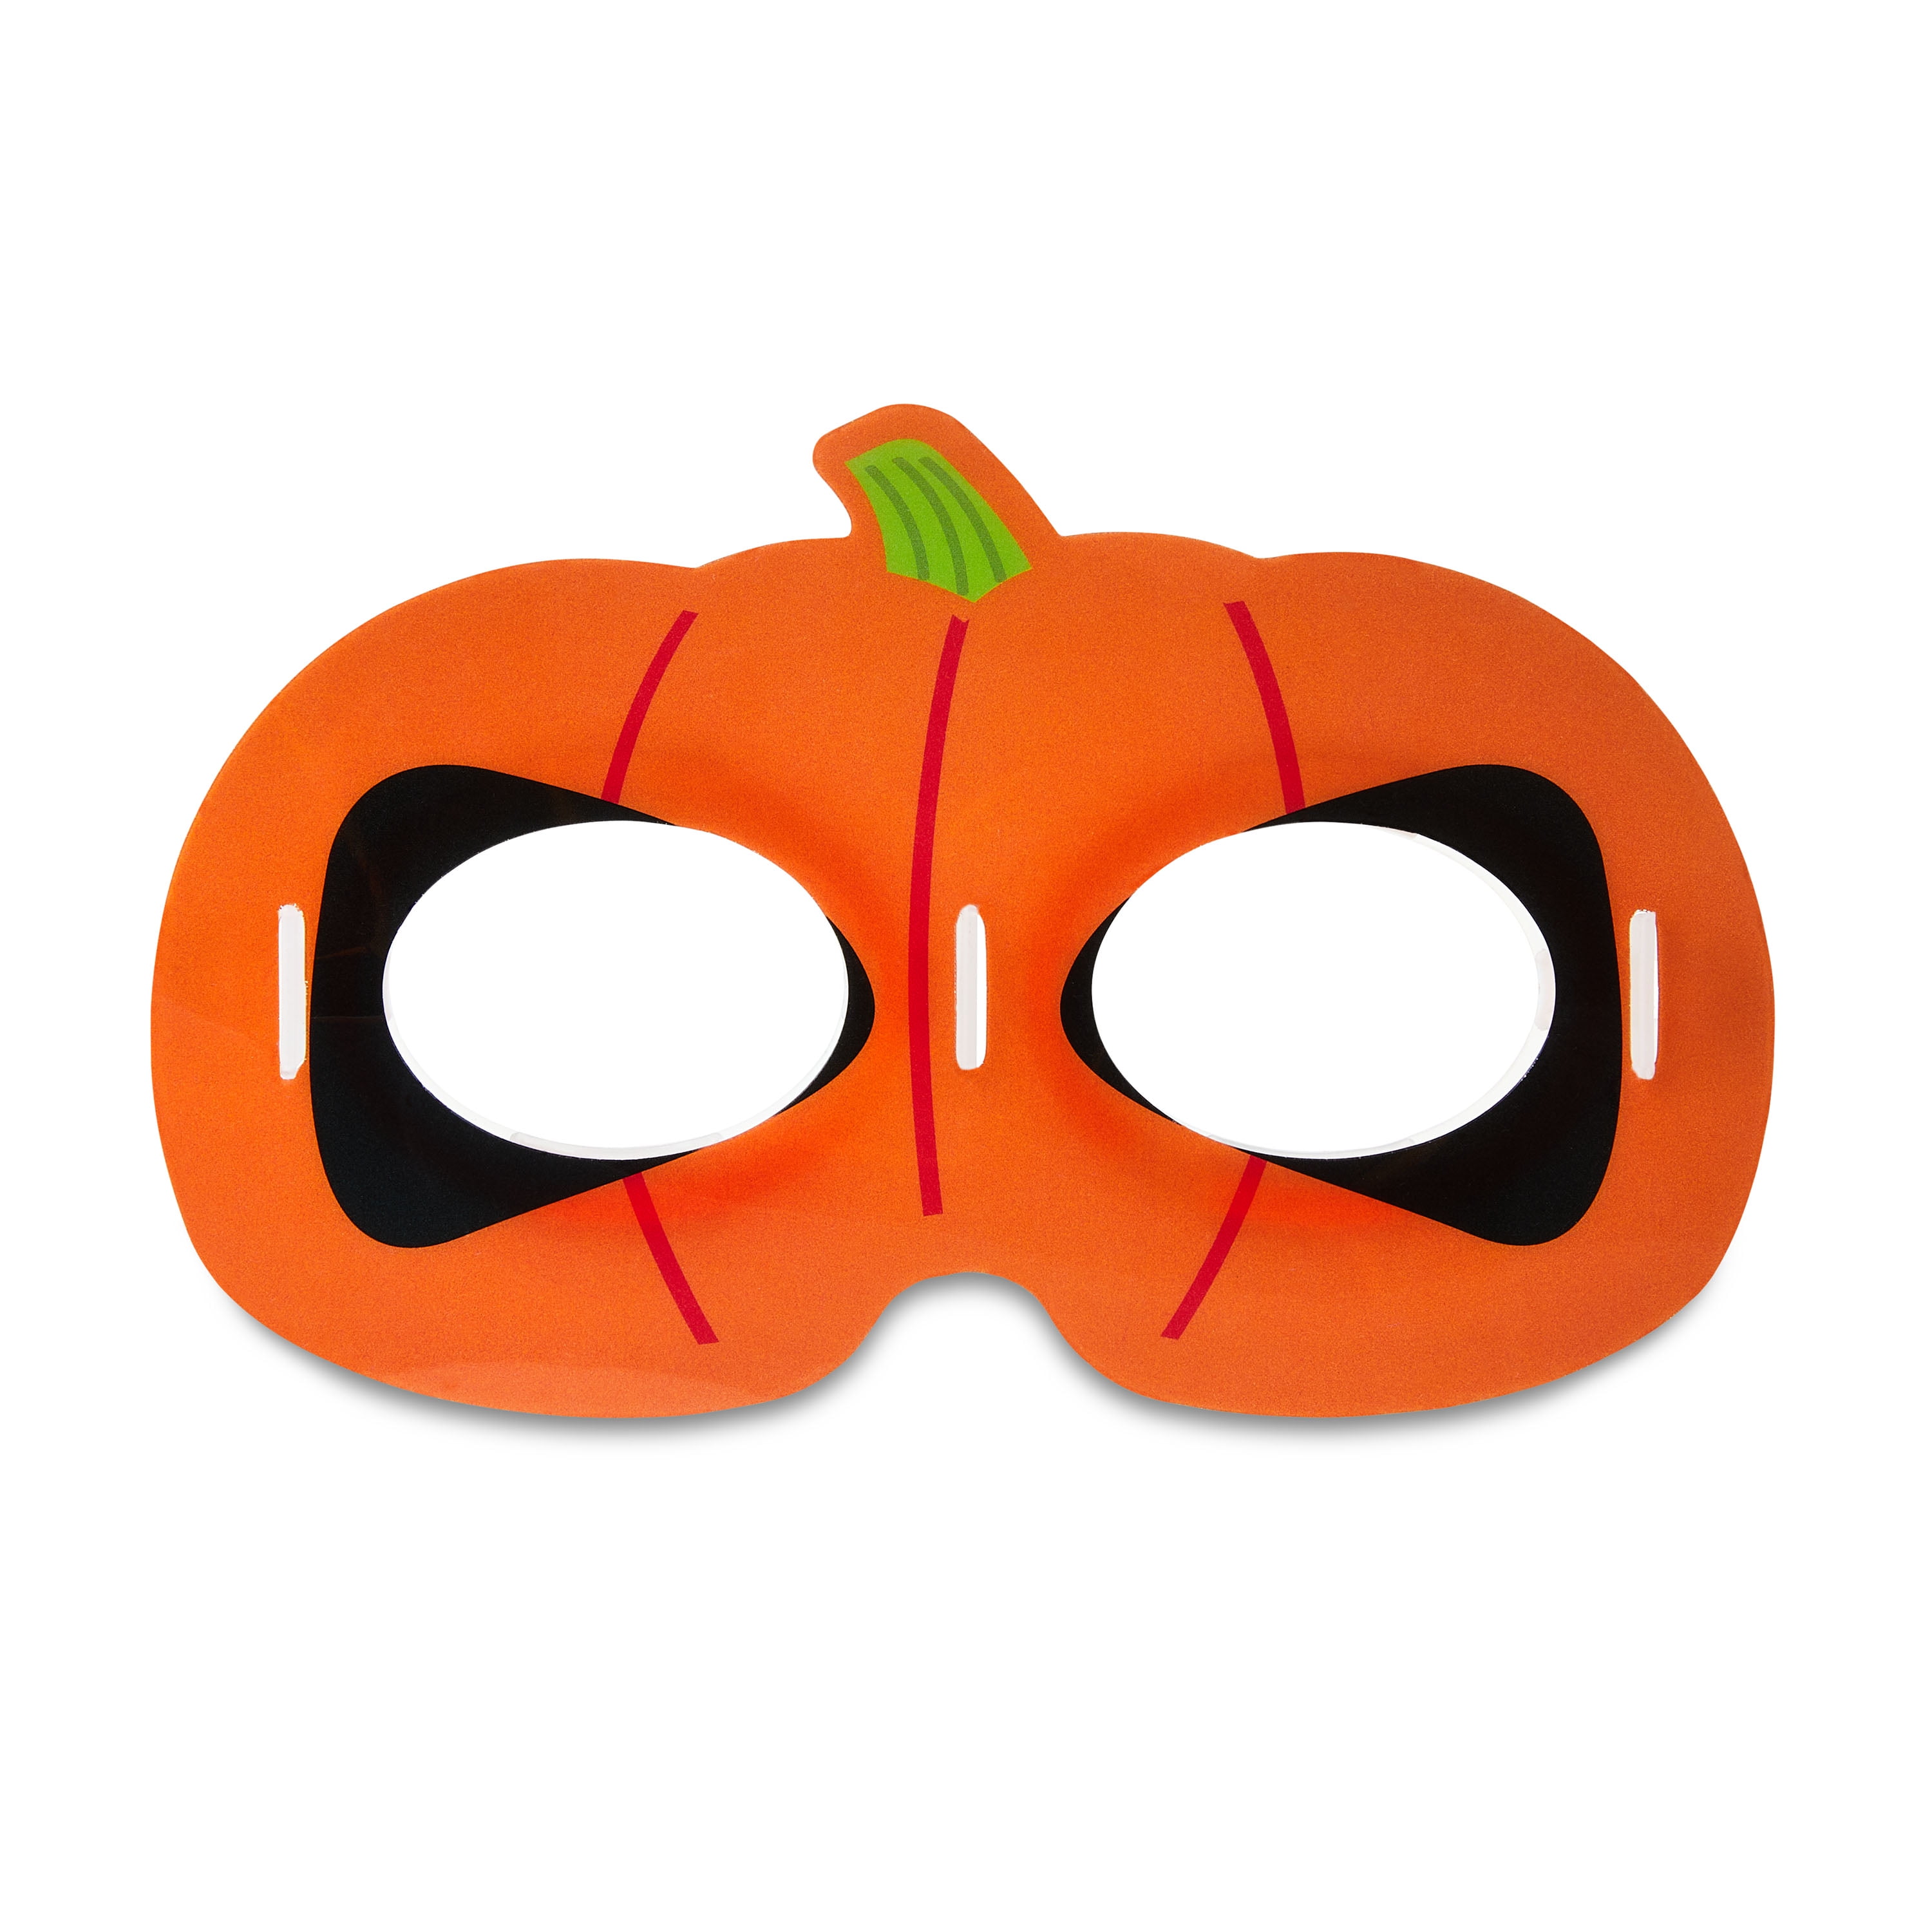 PUMPKIN FACE MASK GOOGLY SPRING EYES Wiggly Moving Plastic Scary Orange  Zombie